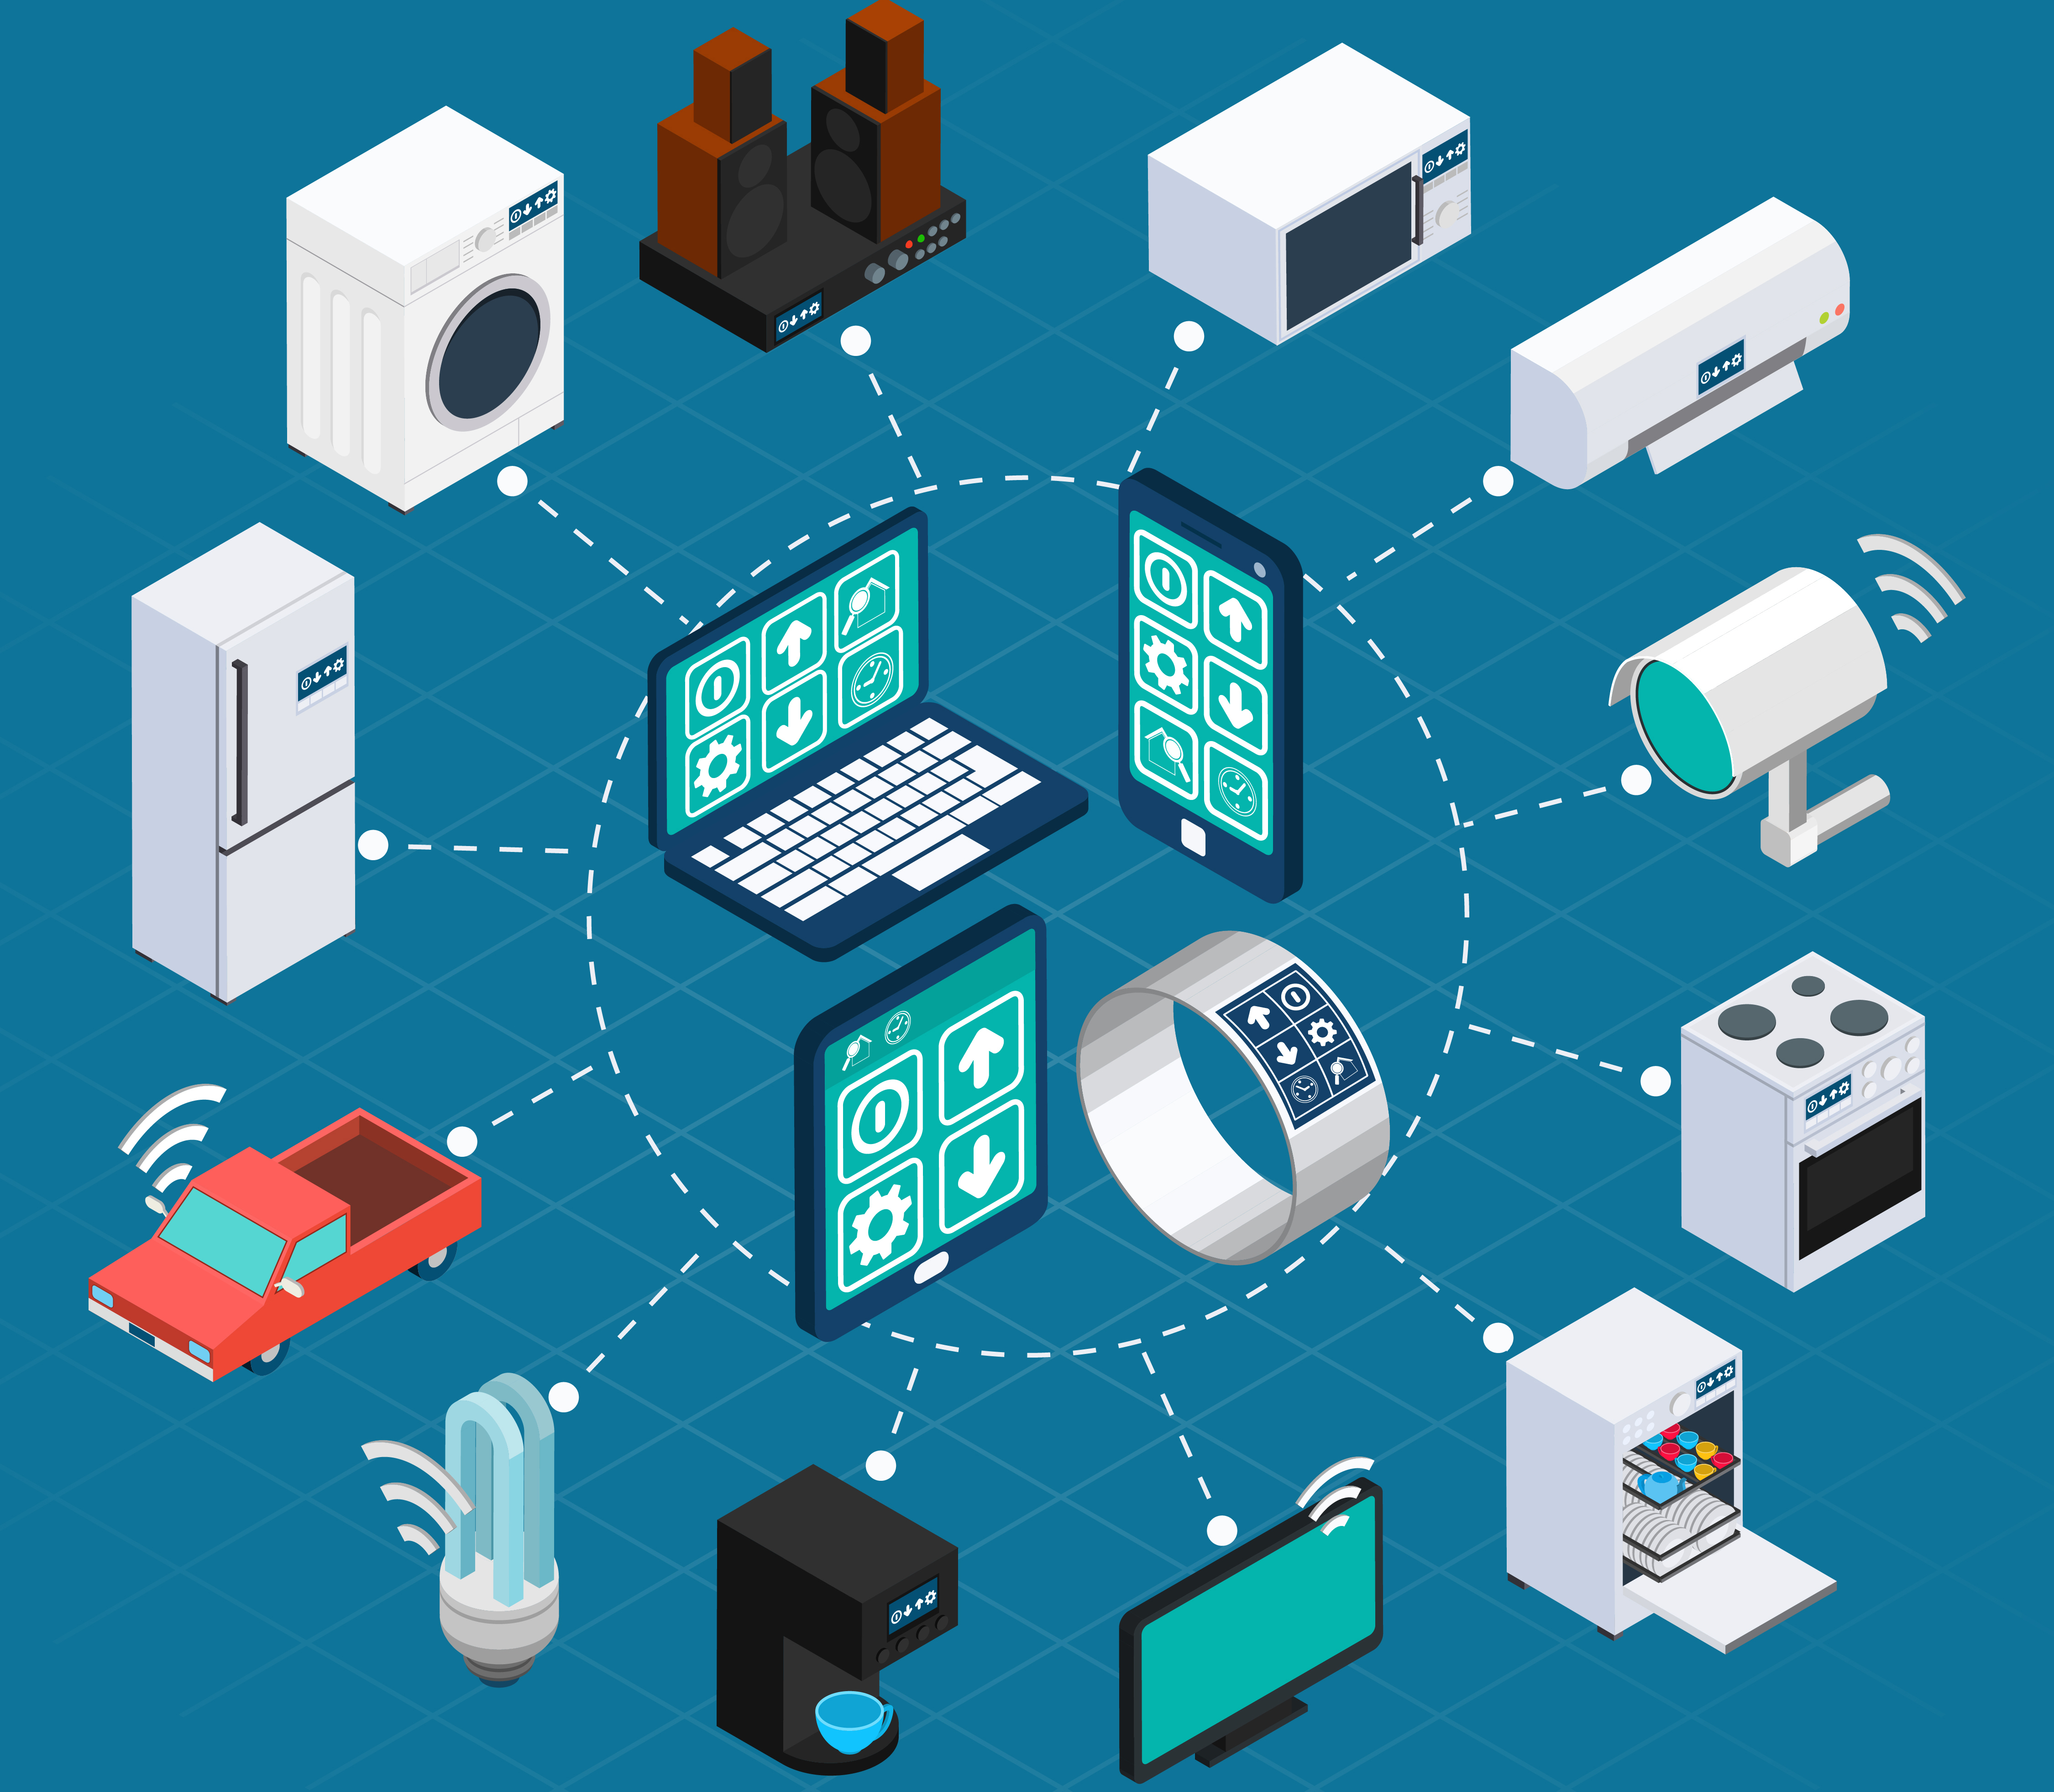 Four Ways the Internet of Things Can Impact Lives